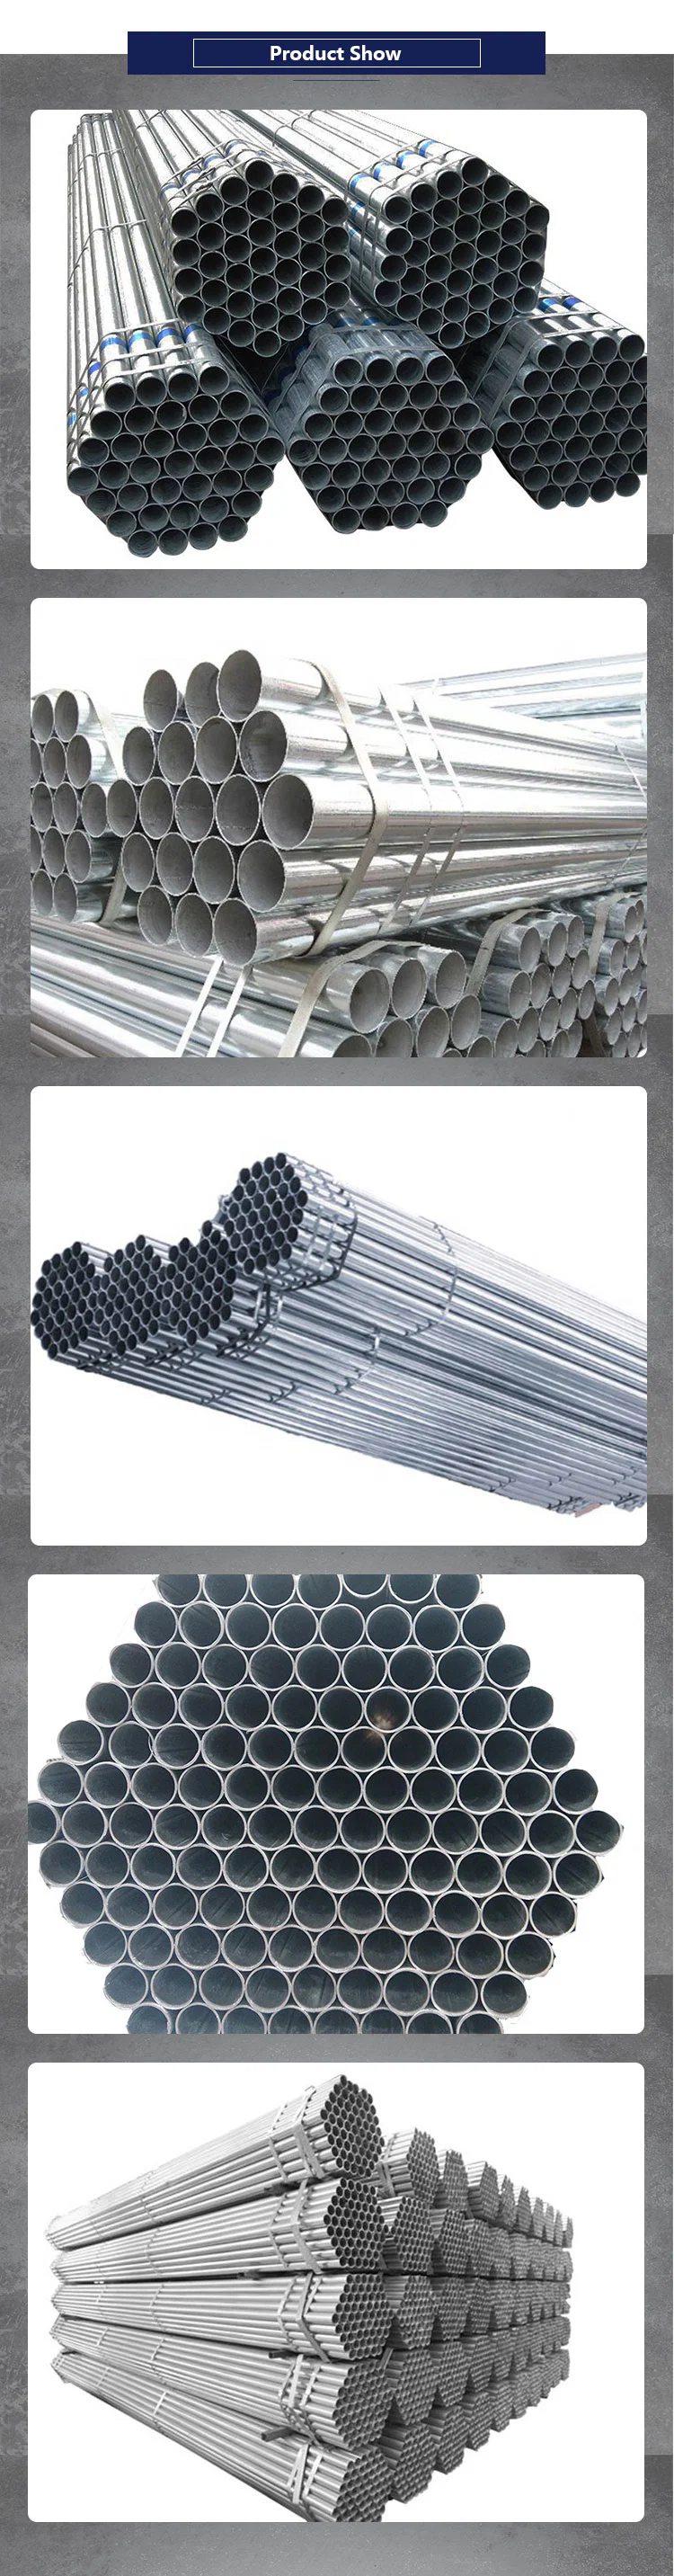 Liange 4 Schedule 40 Galvanized Steel Thick Wall Structural Tube Seamless Round Tubing